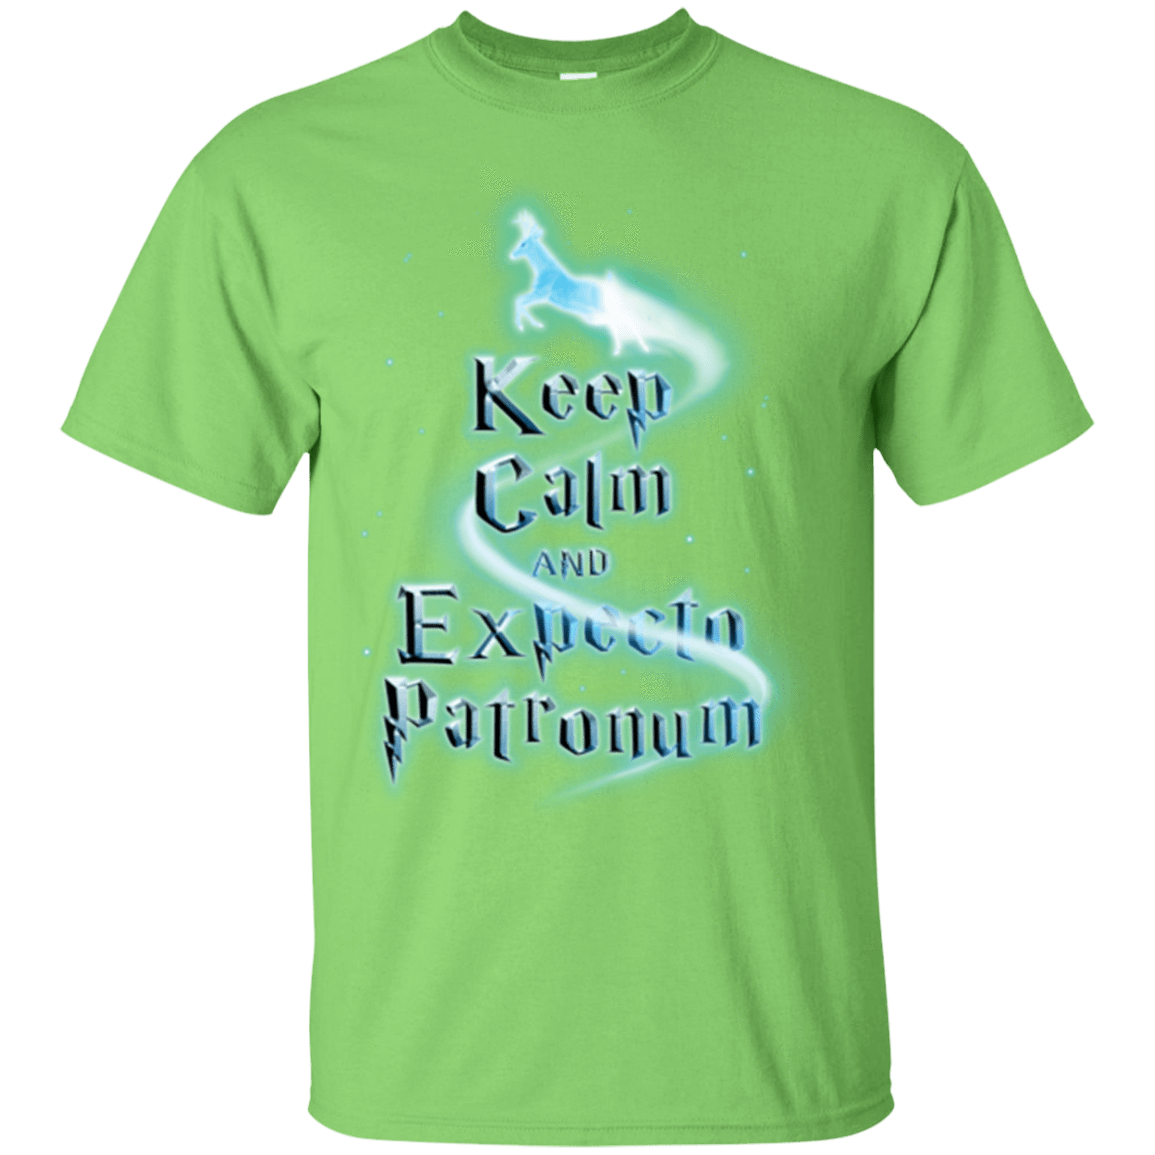 T-Shirts Lime / Small Keep Calm and Expecto Patronum T-Shirt